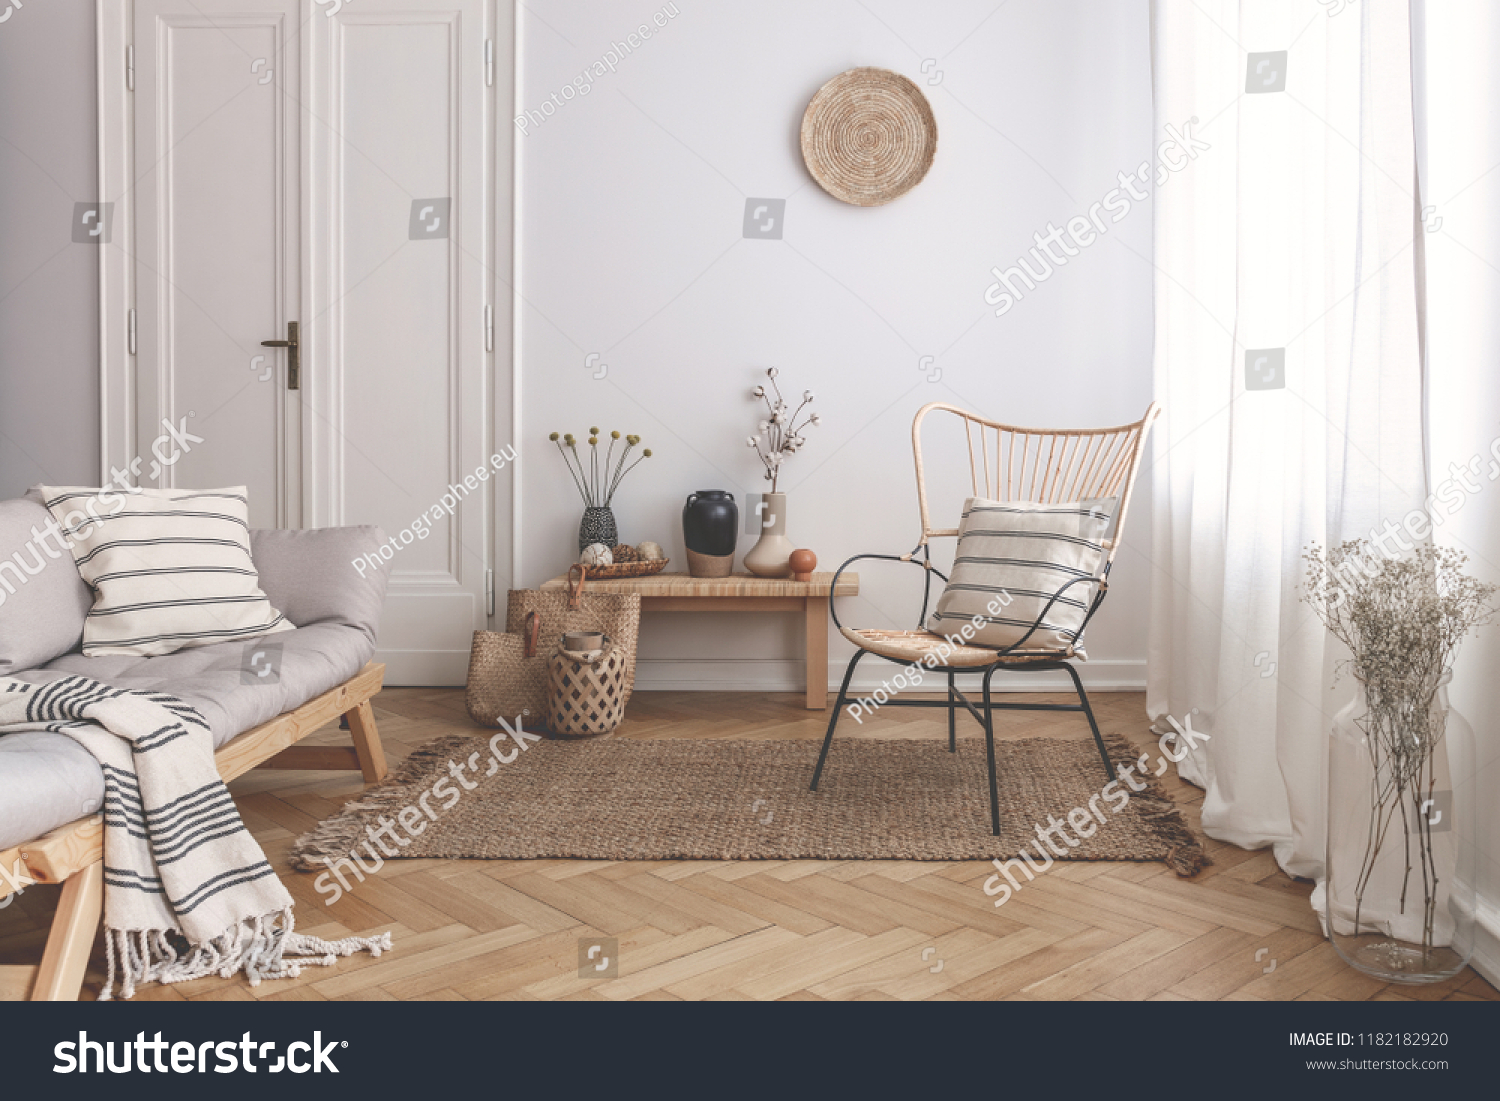 Armchair on rug next to bench with plants in white loft interior with wooden sofa. Real photo #1182182920